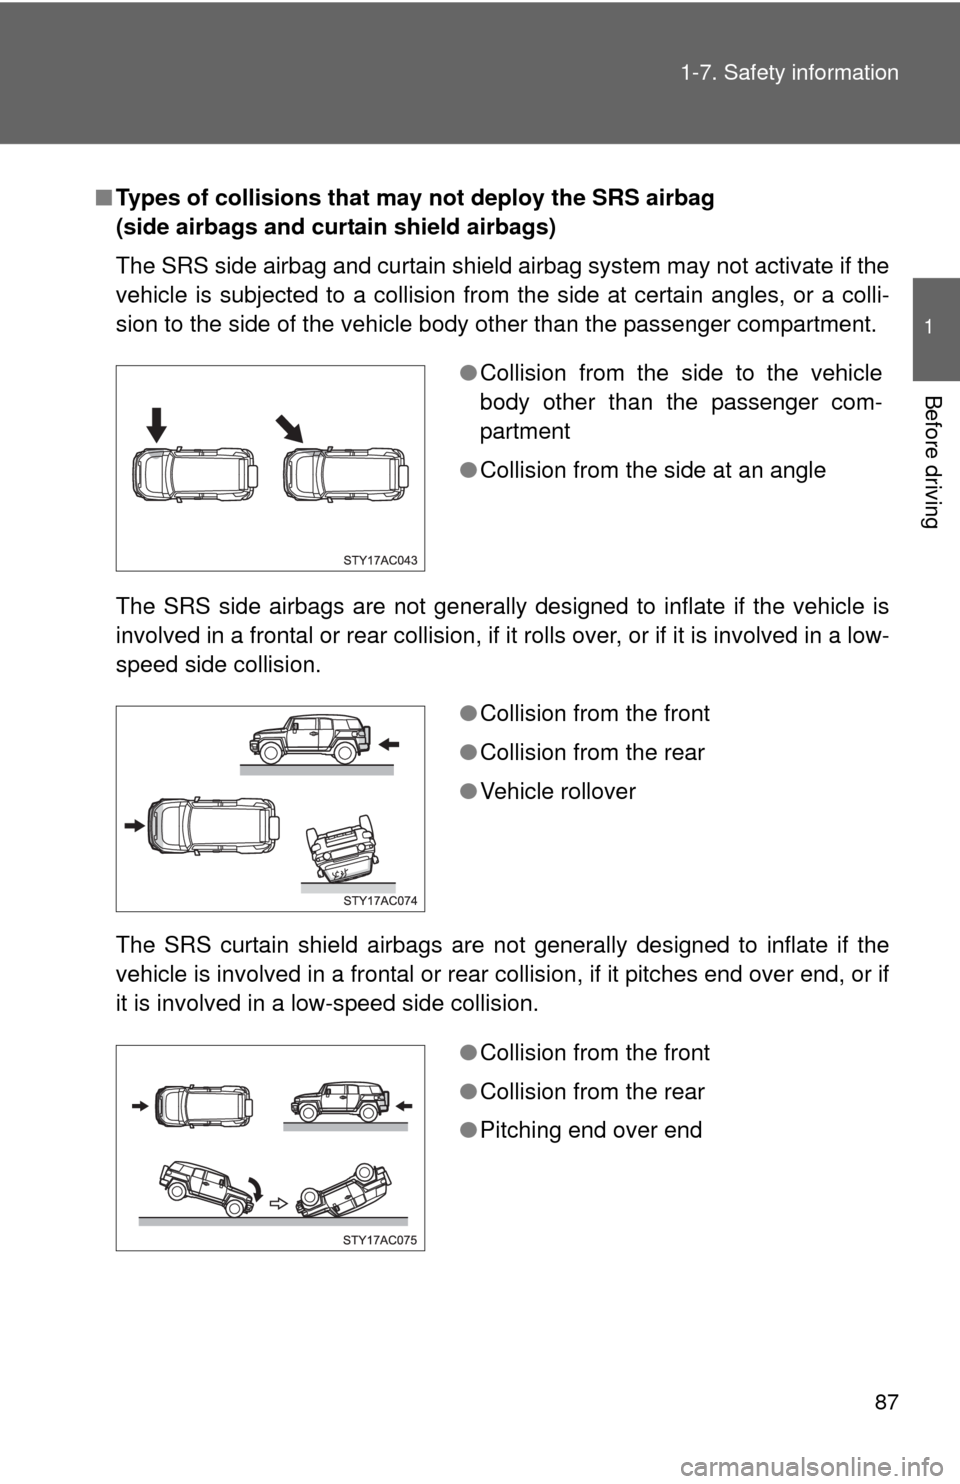 TOYOTA FJ CRUISER 2010 1.G User Guide 87 1-7. Safety information
1
Before driving
■Types of collisions that may not deploy the SRS airbag 
(side airbags and curtain shield airbags)
The SRS side airbag and curtain shield airbag system ma